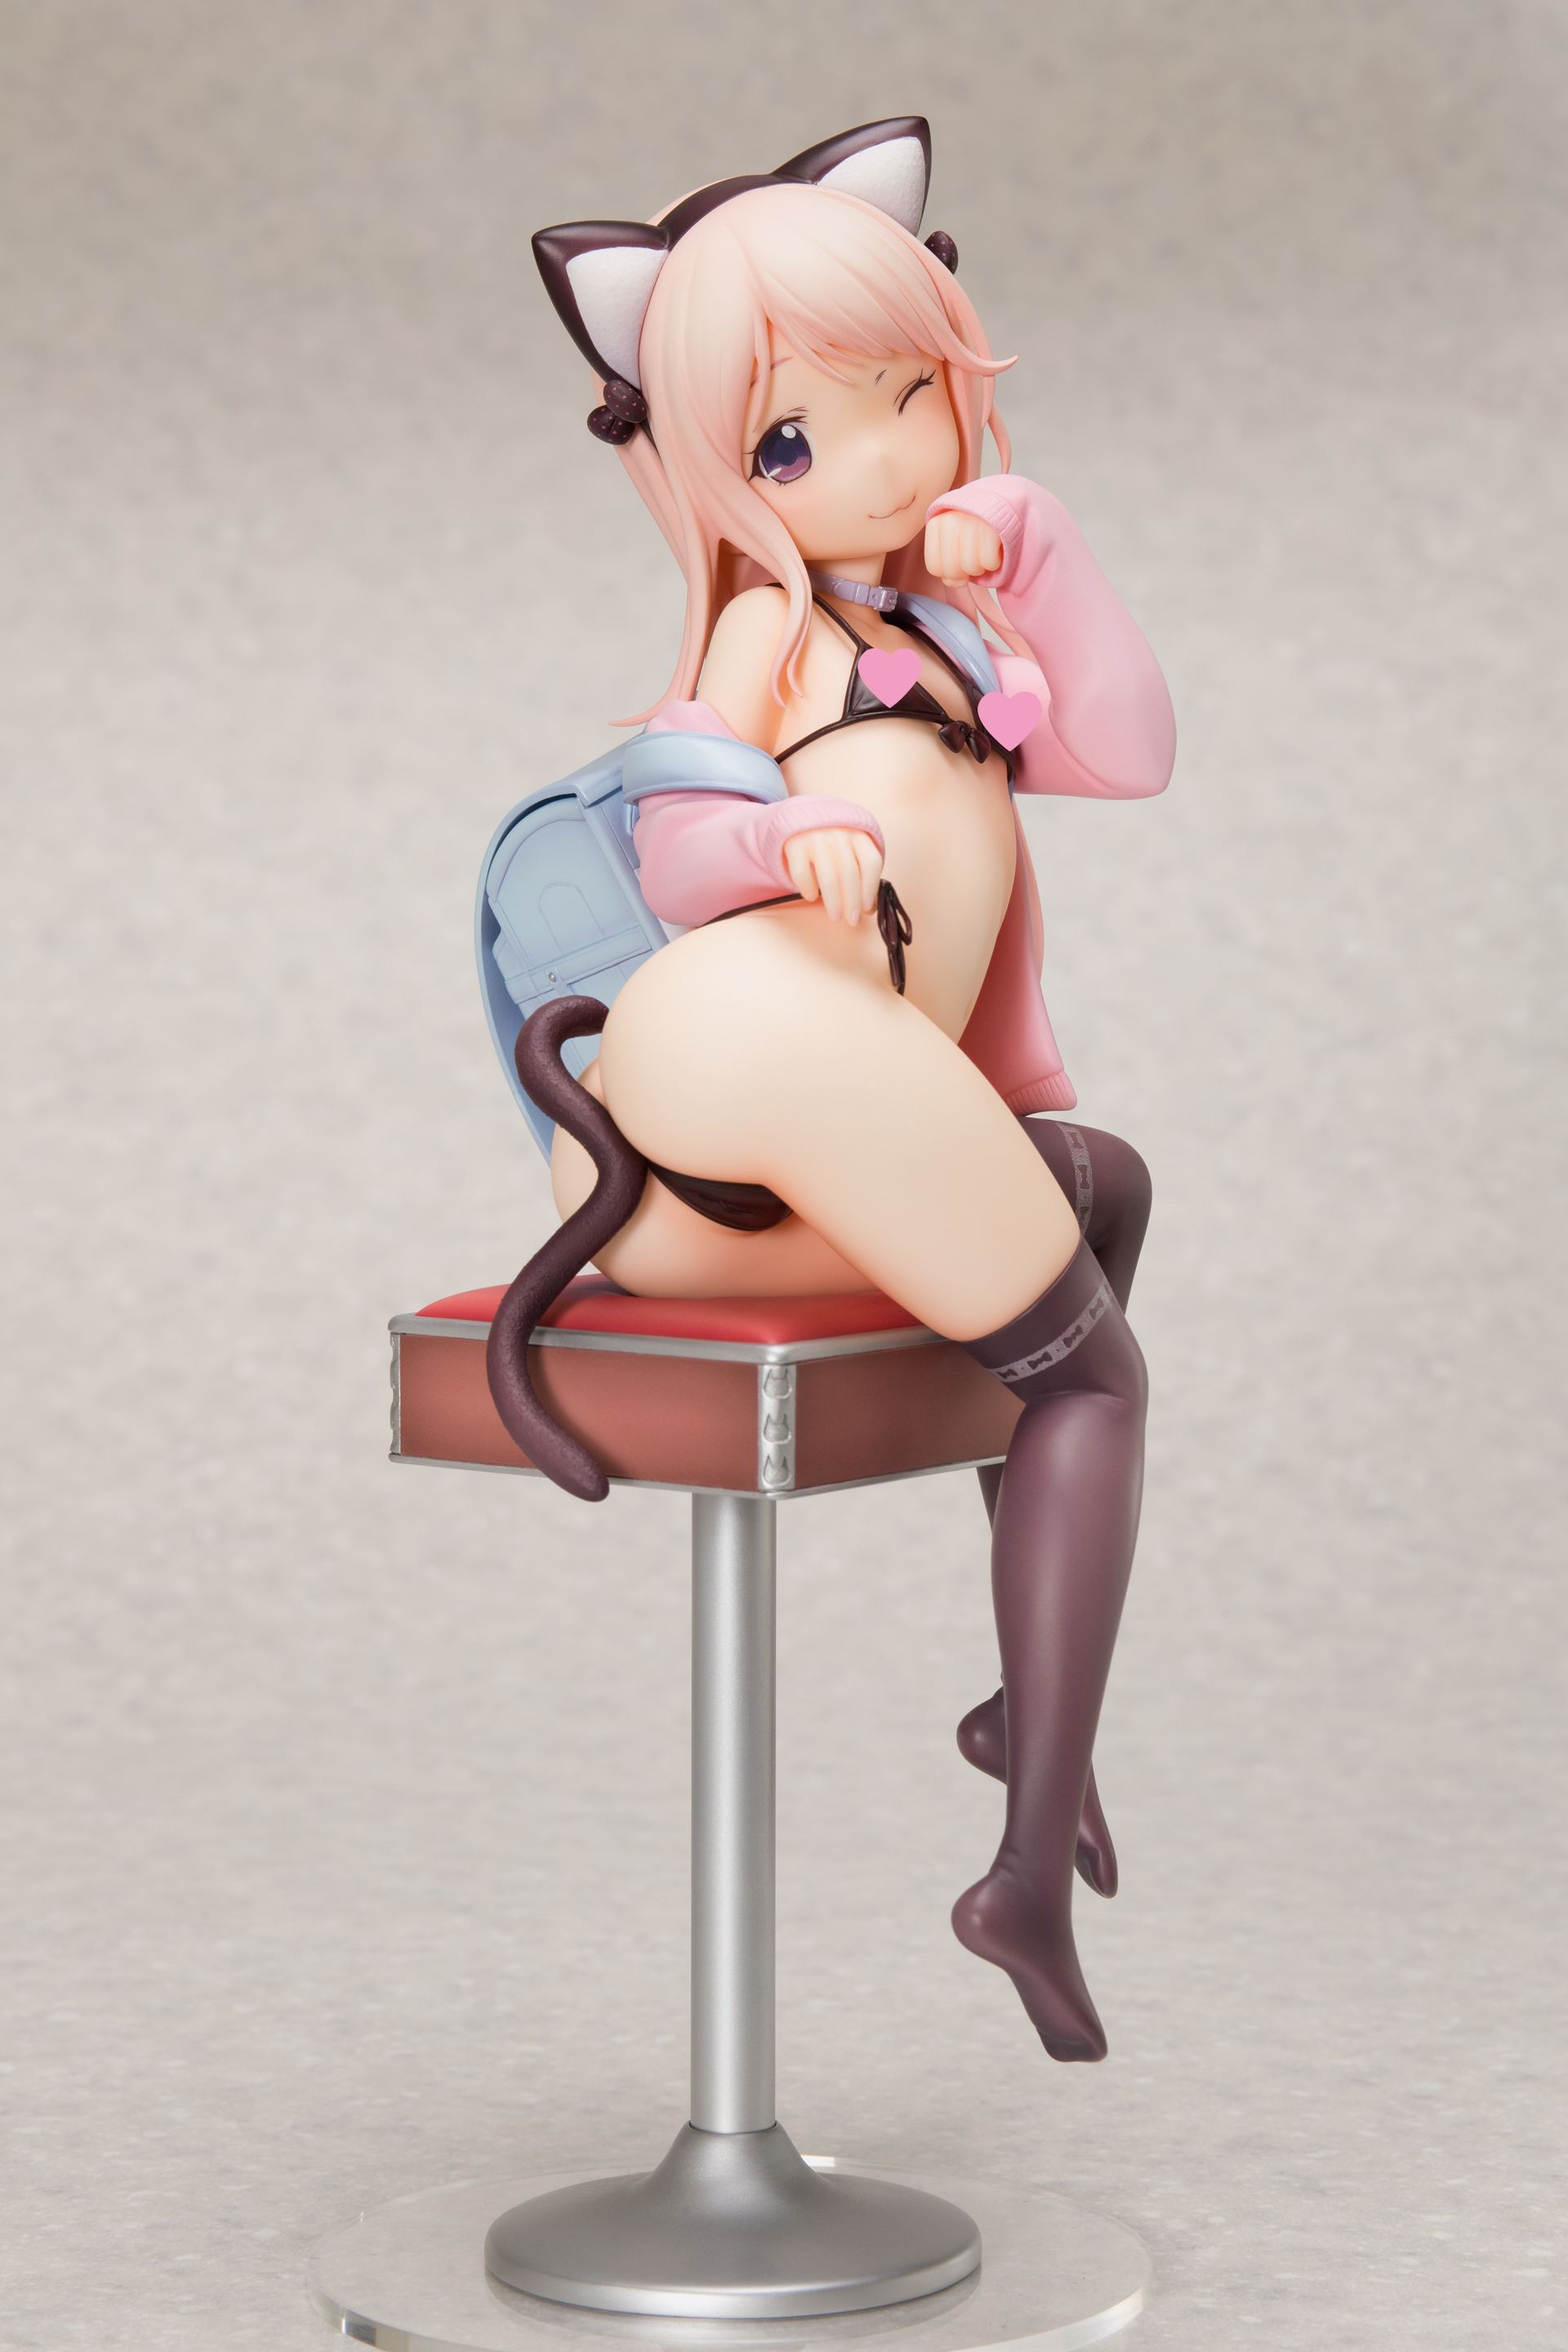 HATSUKOI RIBBON 1/6 SCALE PRE-PAINTED FIGURE: YUU ILLUSTRATED BY HENREADER (RE-RUN) Orchid Seed